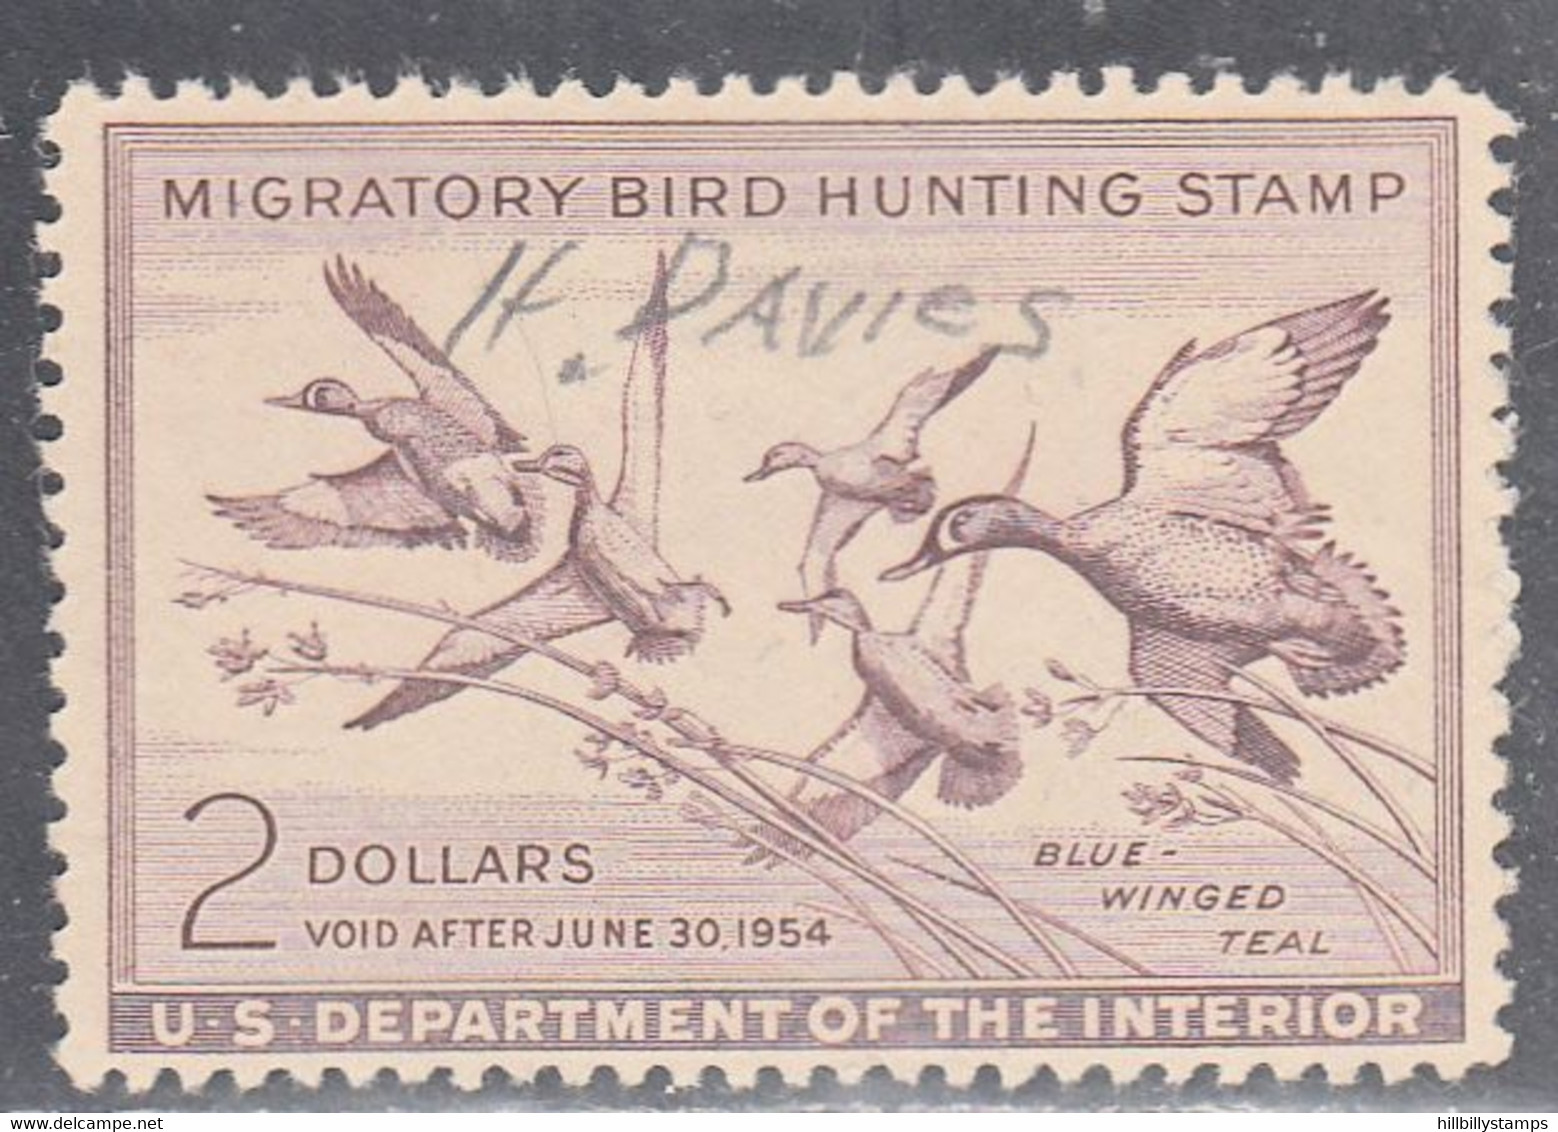 UNITED STATES   SCOTT NO  RW20    USED     YEAR  1953 - Duck Stamps